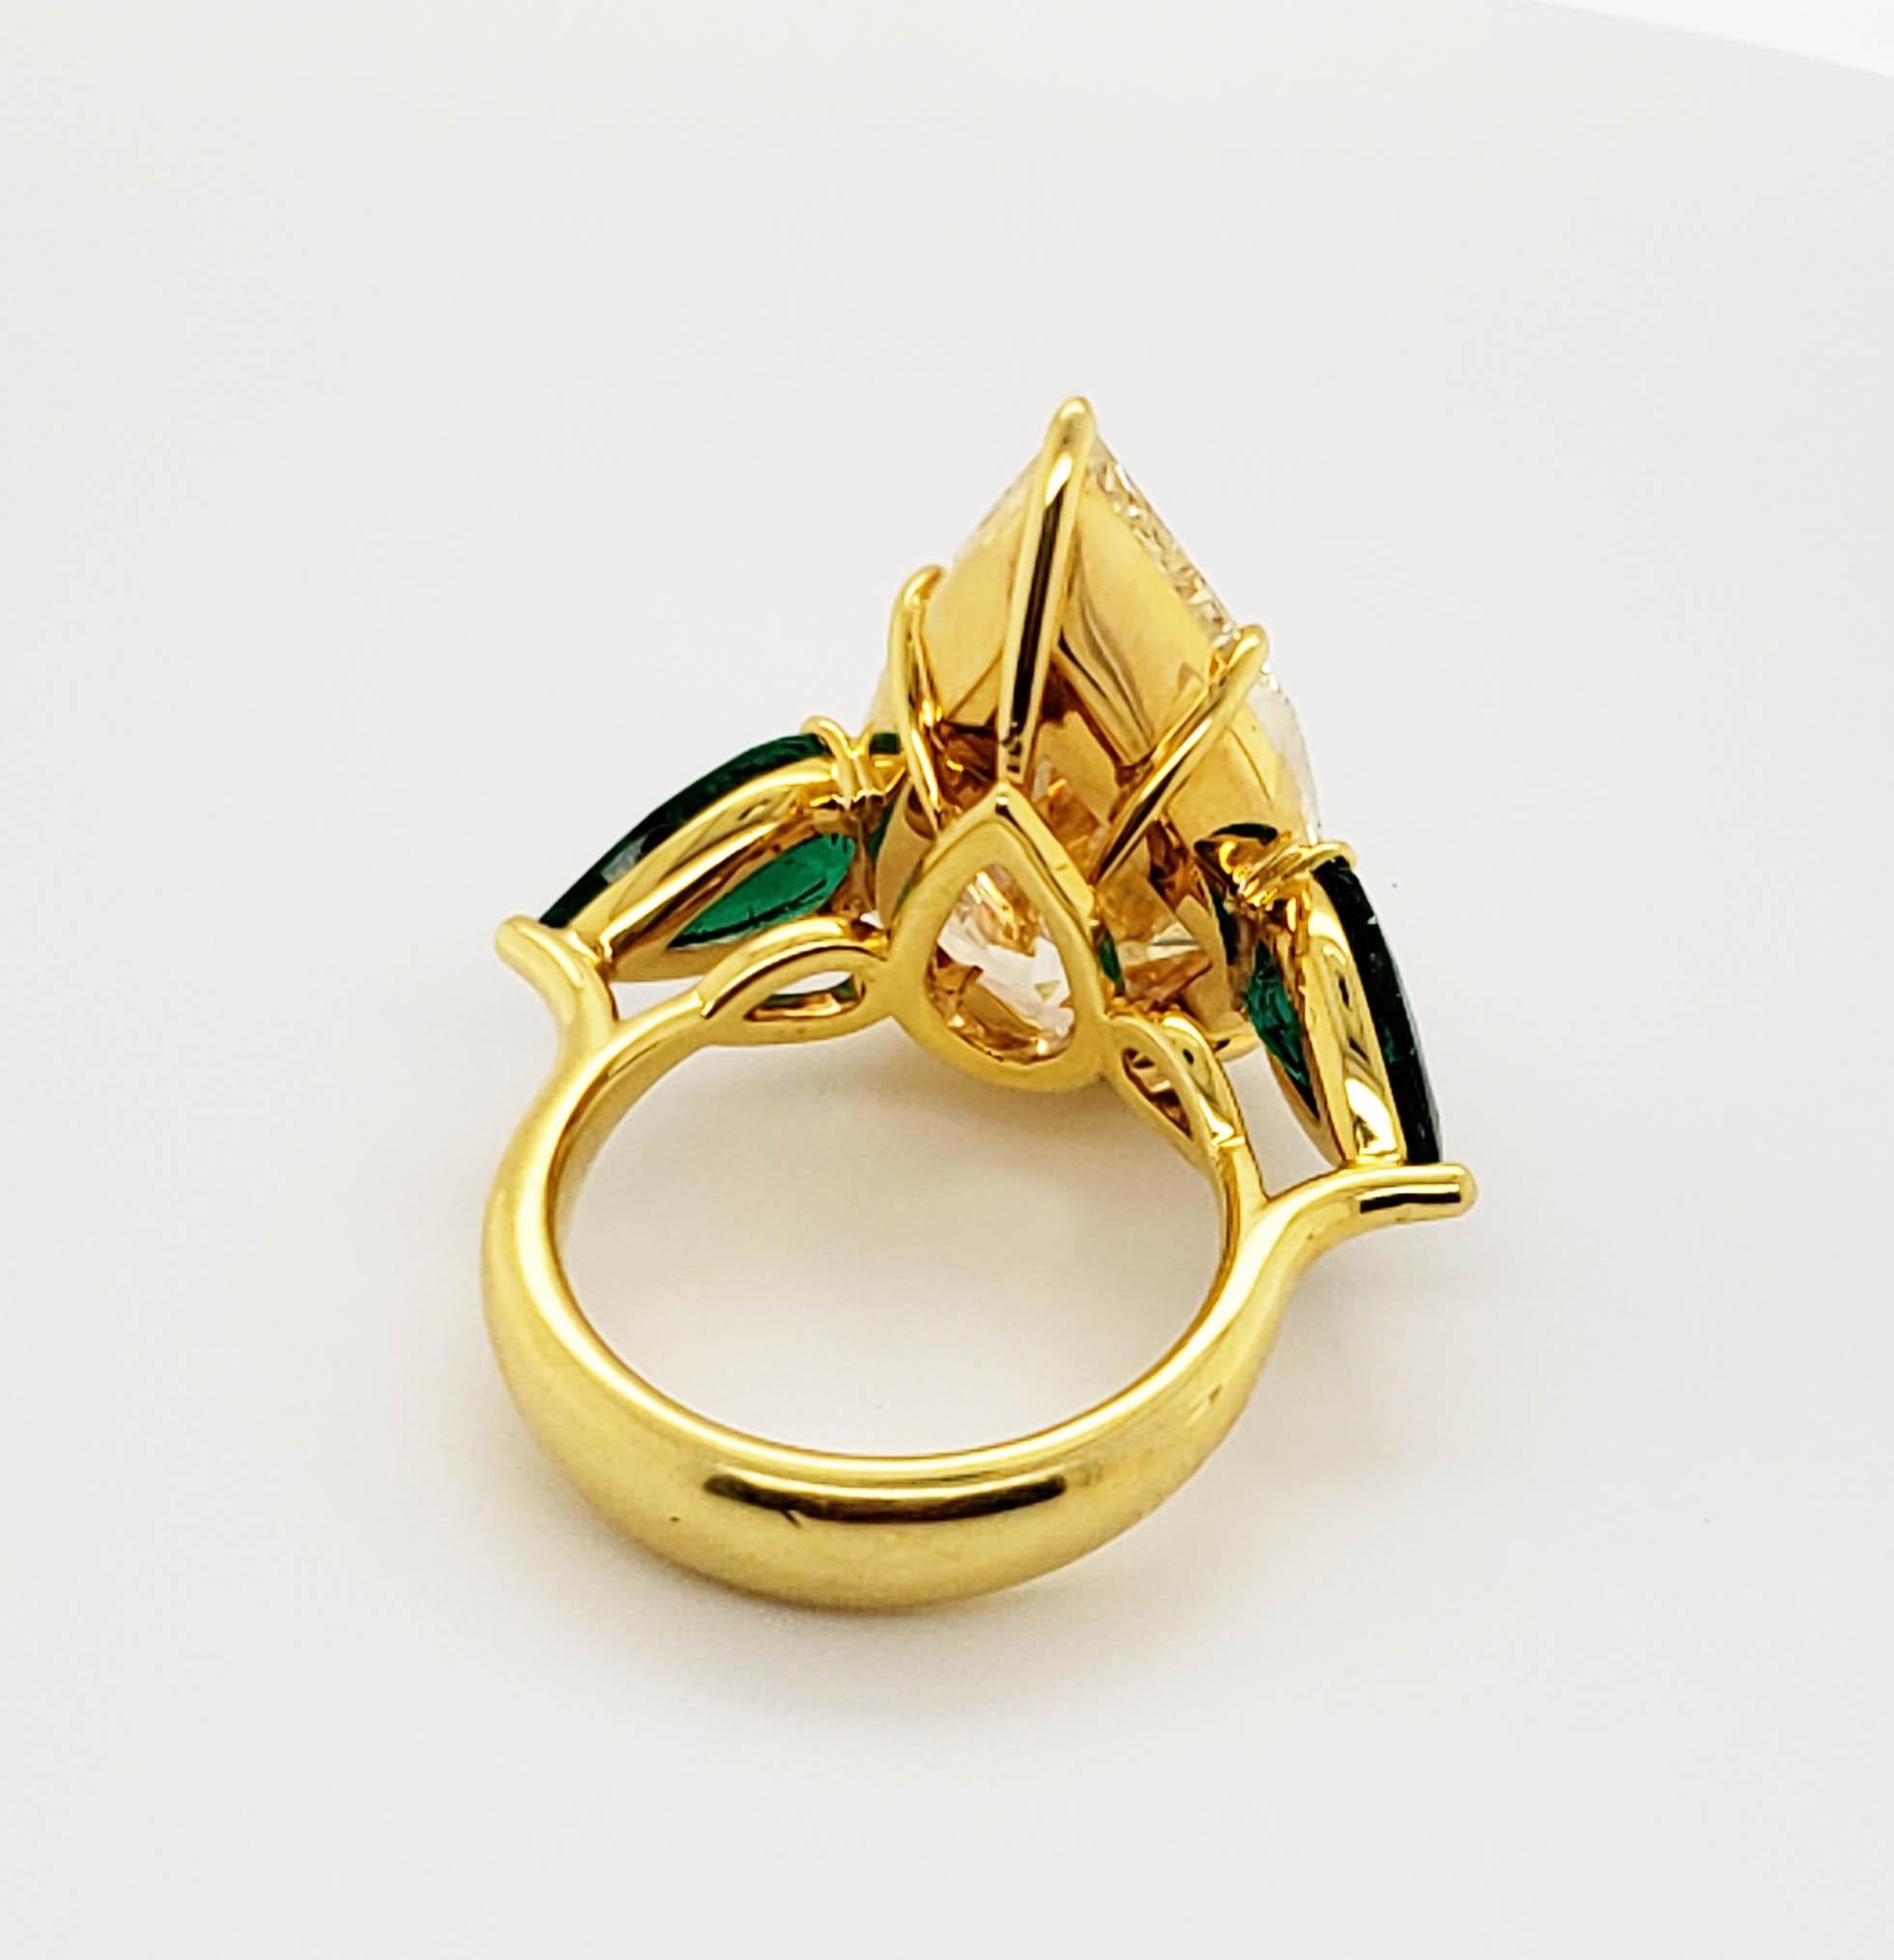 Contemporary Scarselli Ring 14 Carat Pear Shape Yellow Diamond with Emeralds